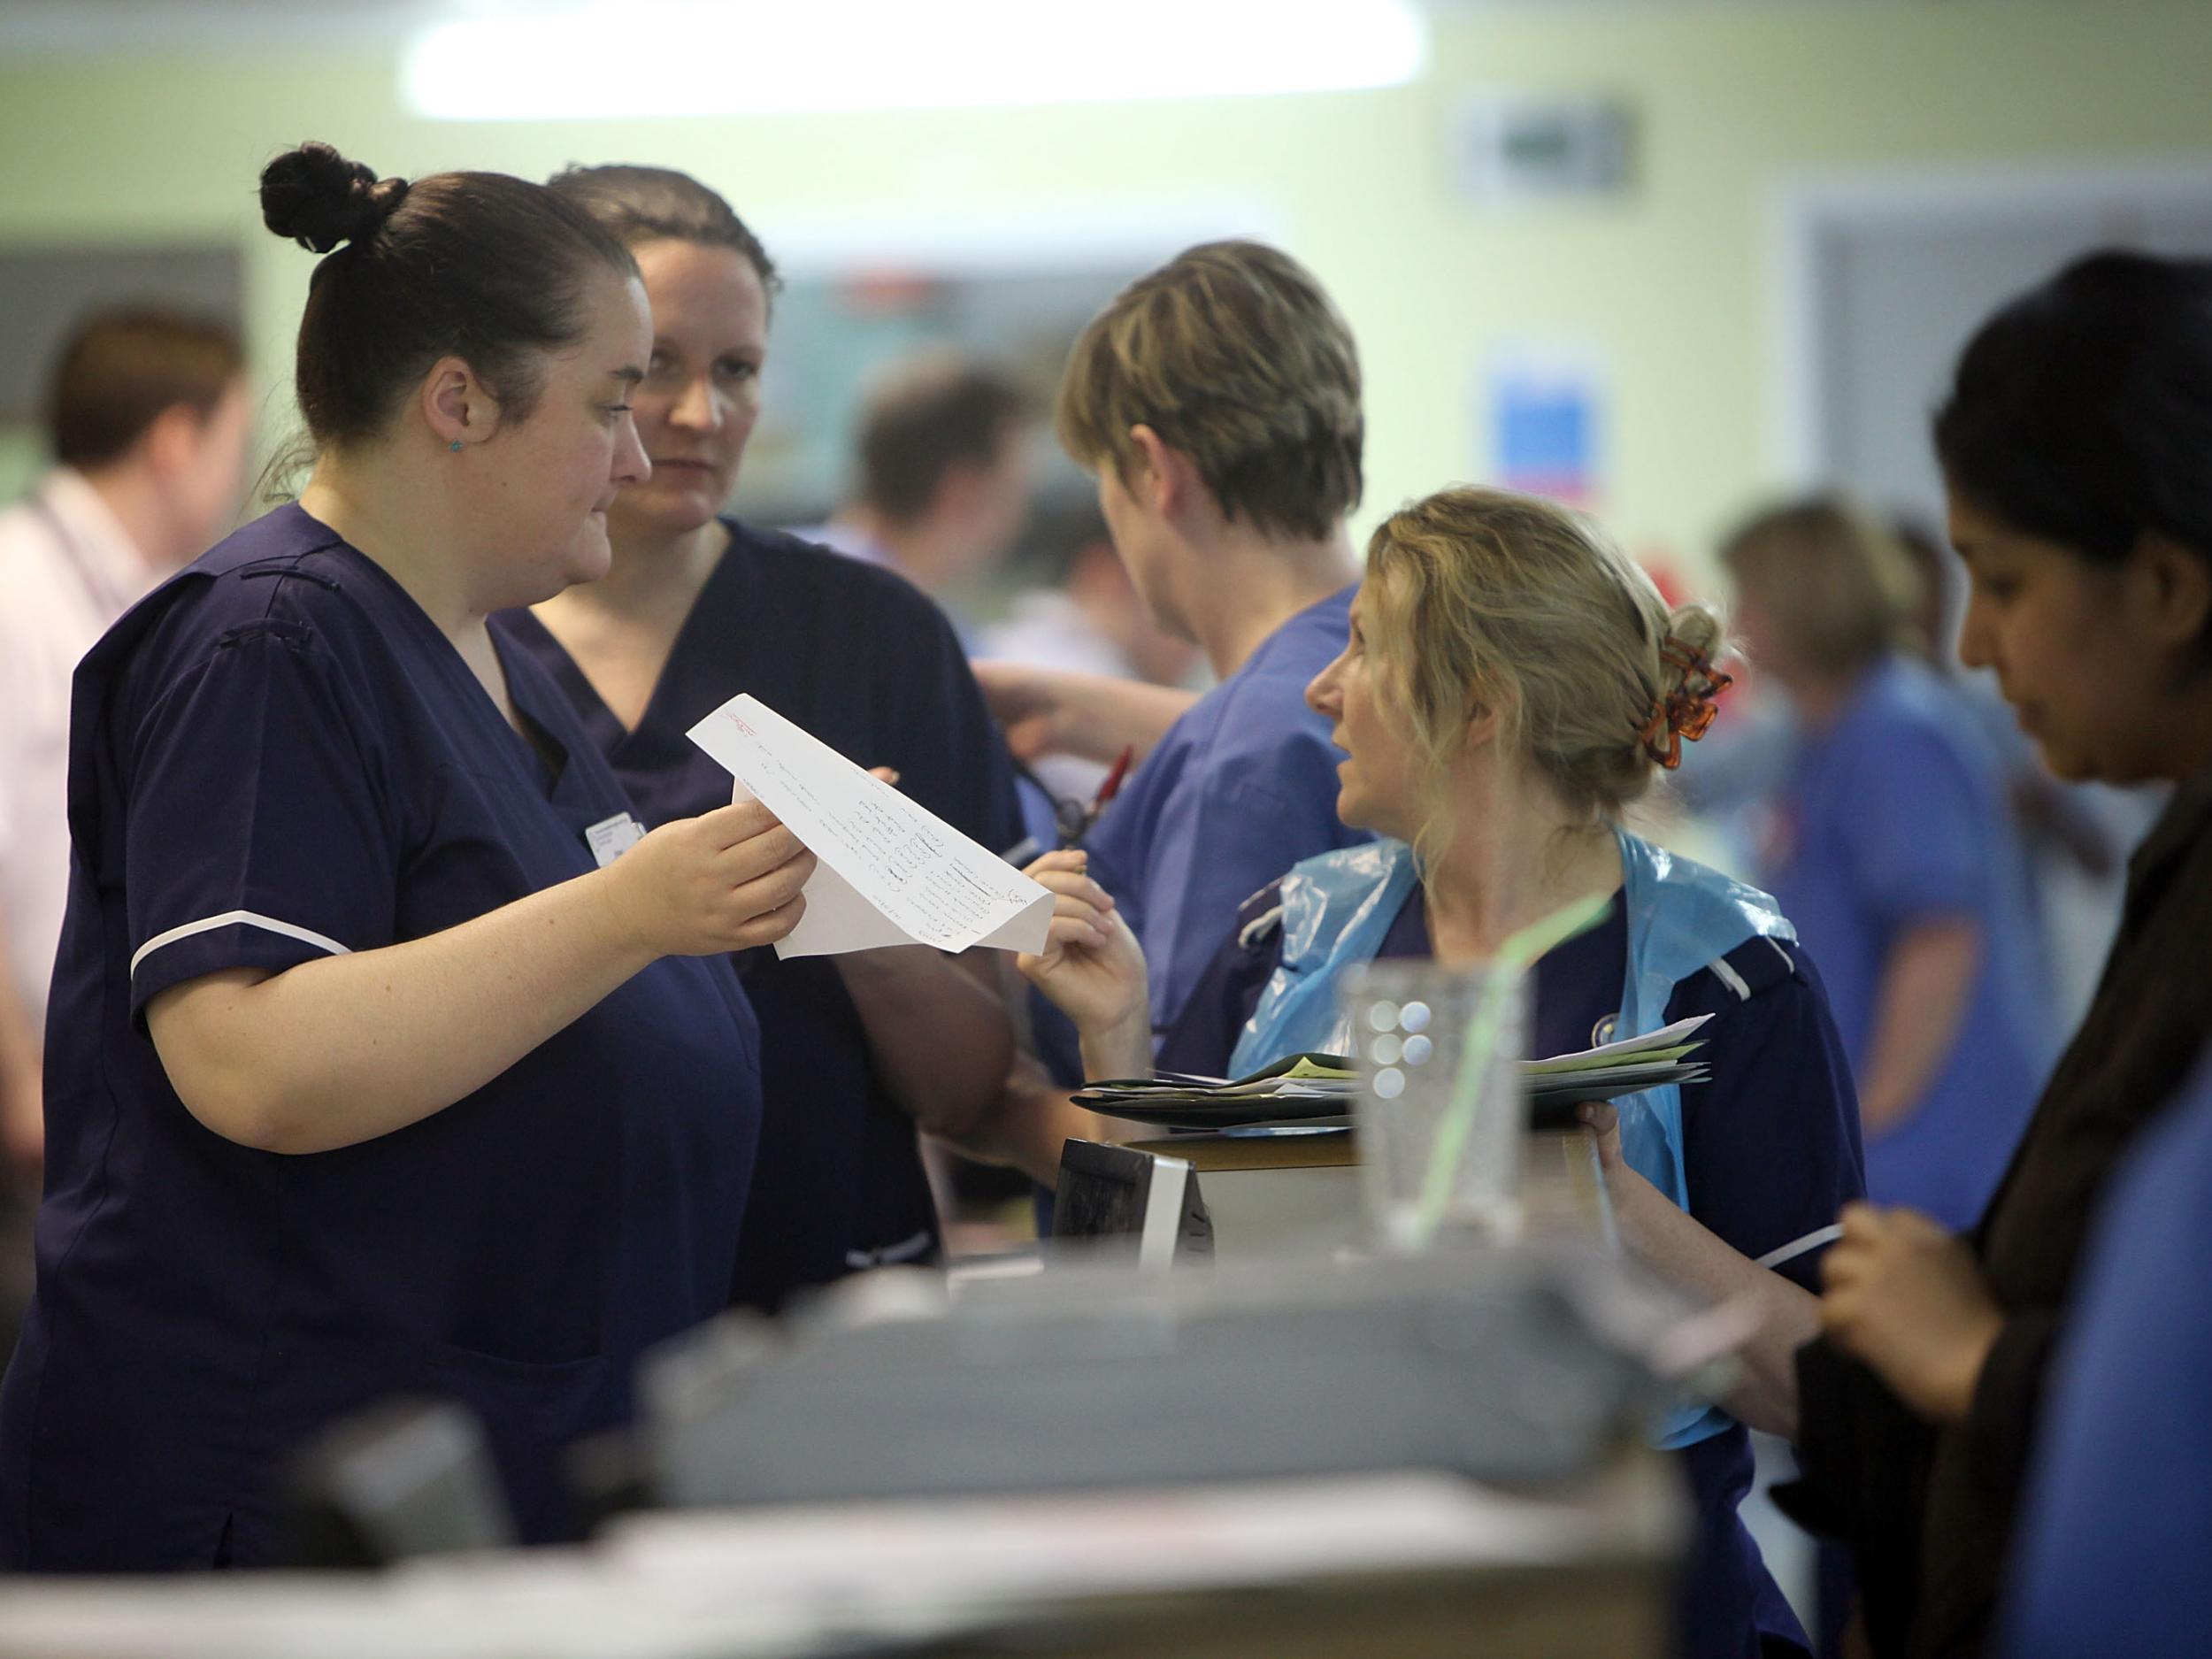 NHS staff are being stretched to their limit as trusts implement 'black alert' action plans to protect urgent care (File photo)